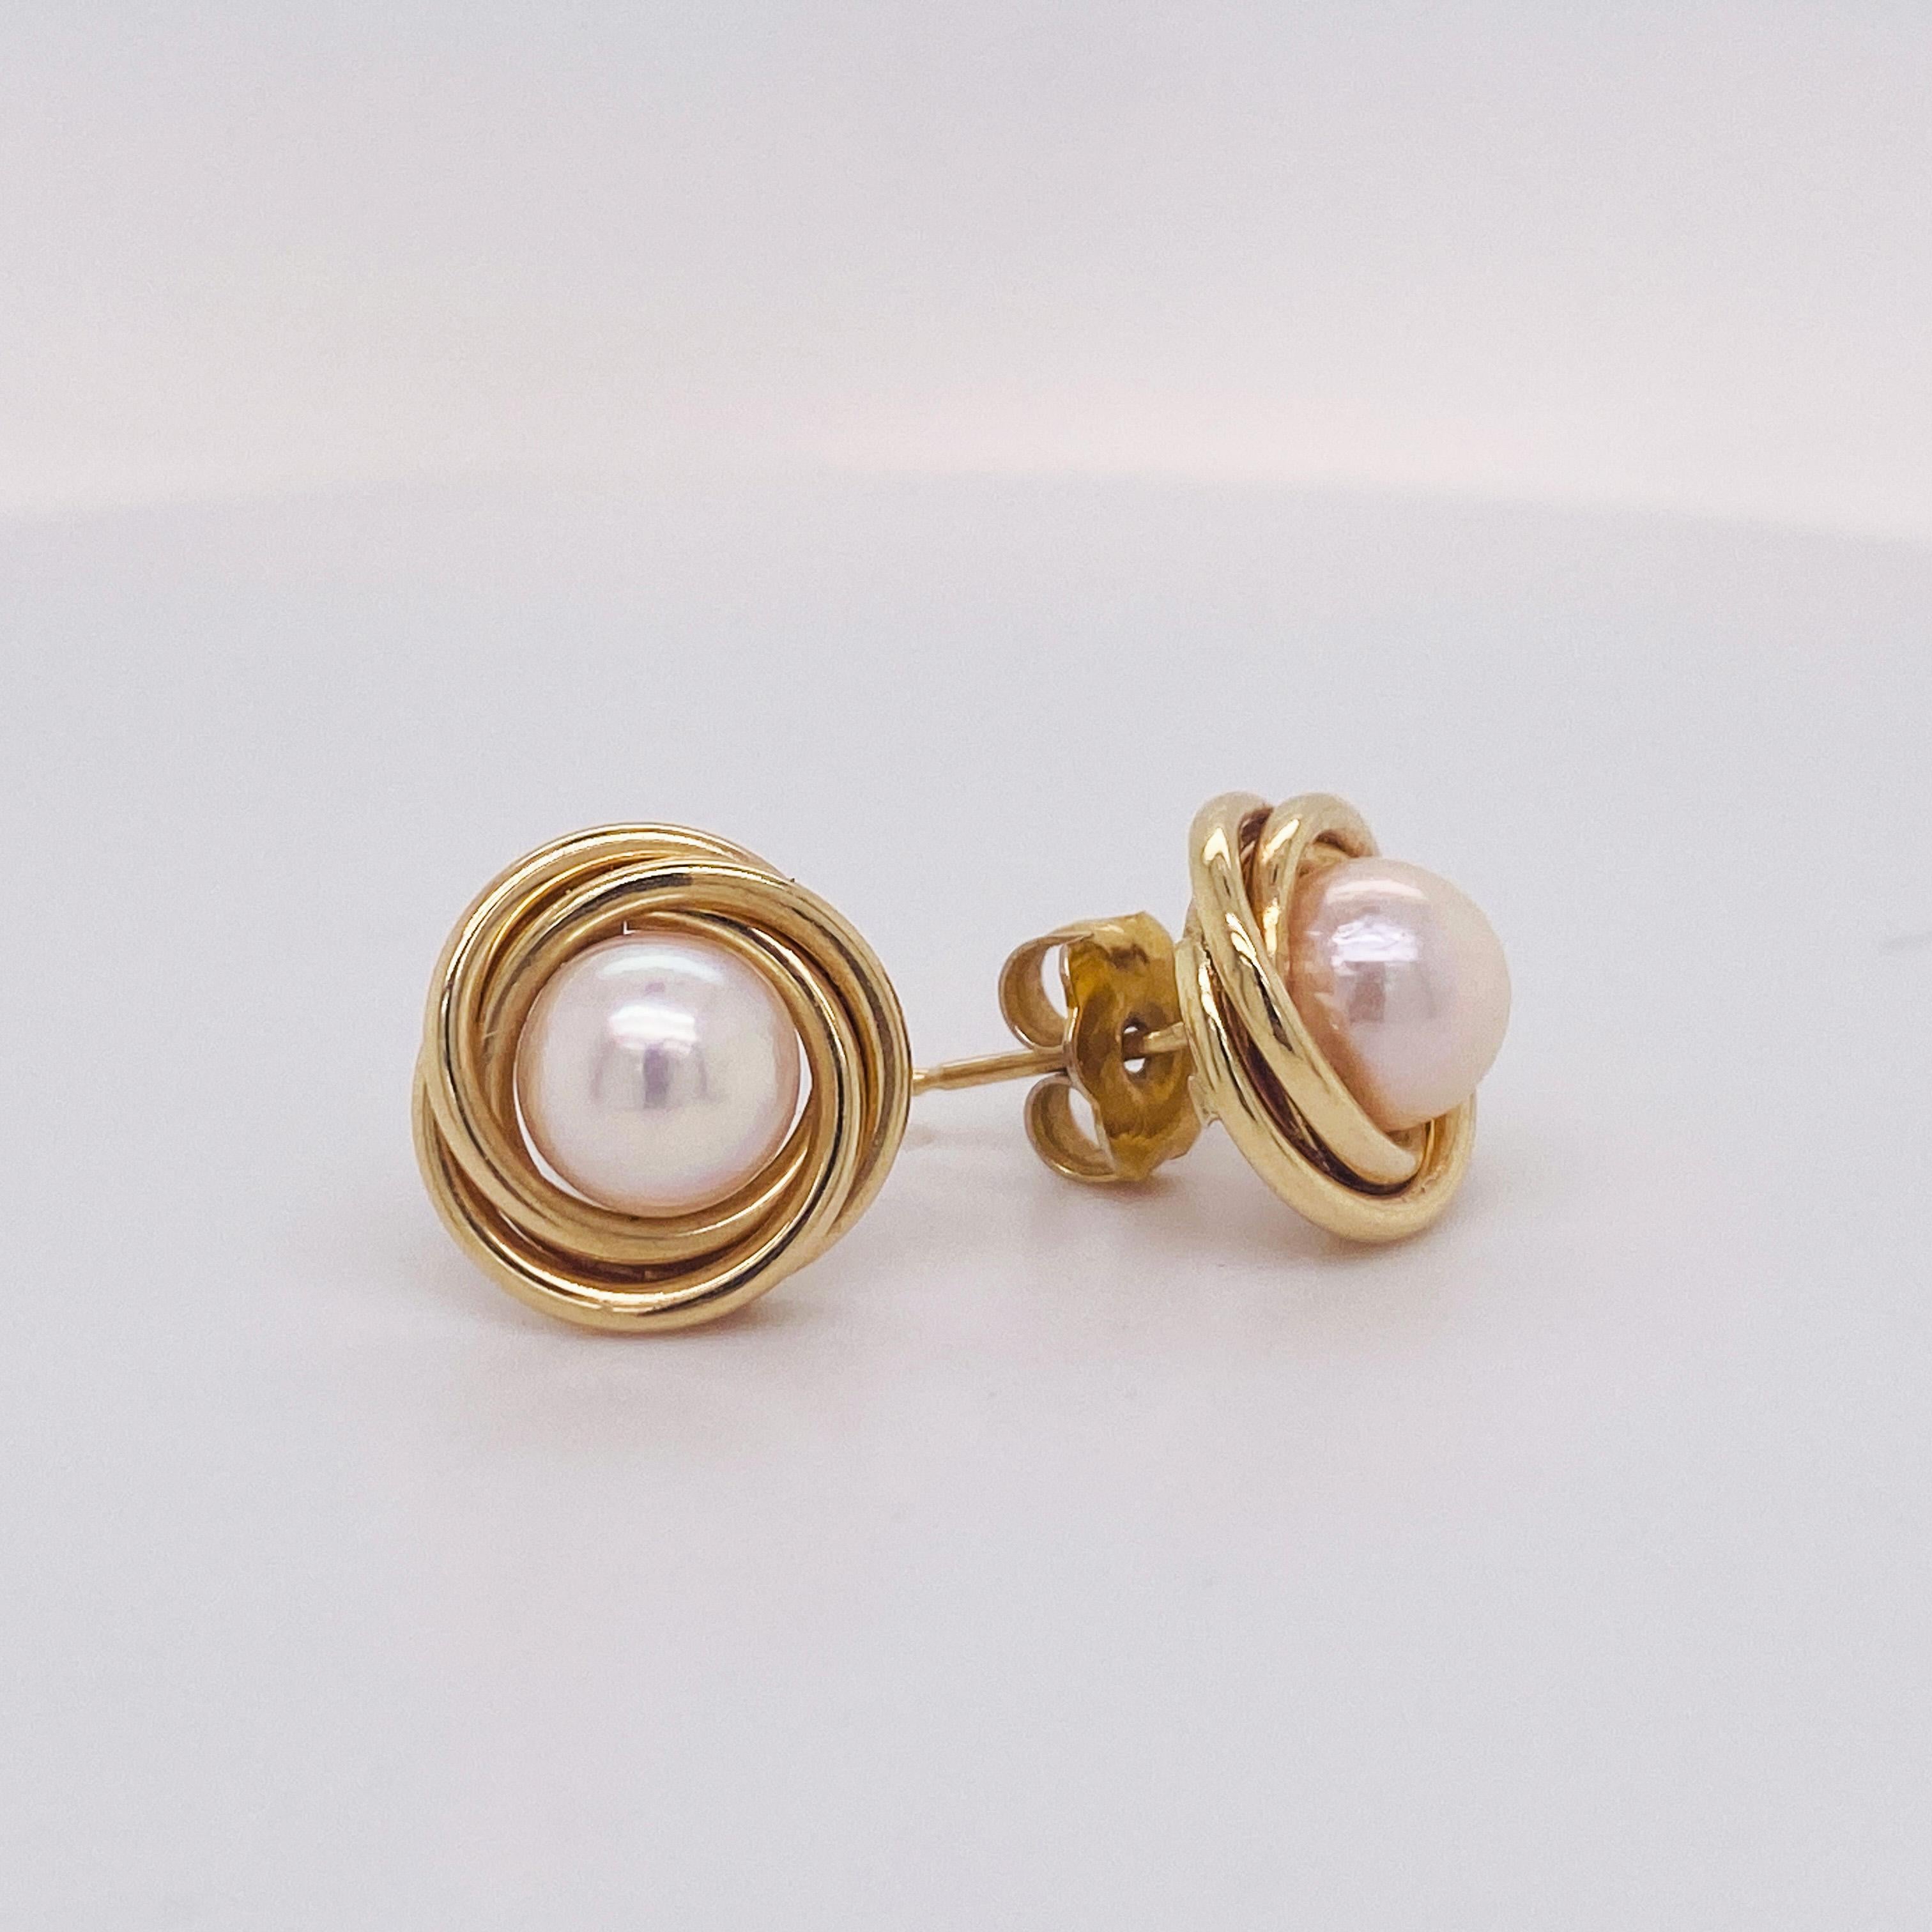 Best Selling Pearl Earrings! Add a little pizazz to your pearl jewelry with this knot frame pearl earring. The touch of solid 14-karat yellow gold adds a lot to the design. These are the perfect earrings for a gift! The details for these gorgeous